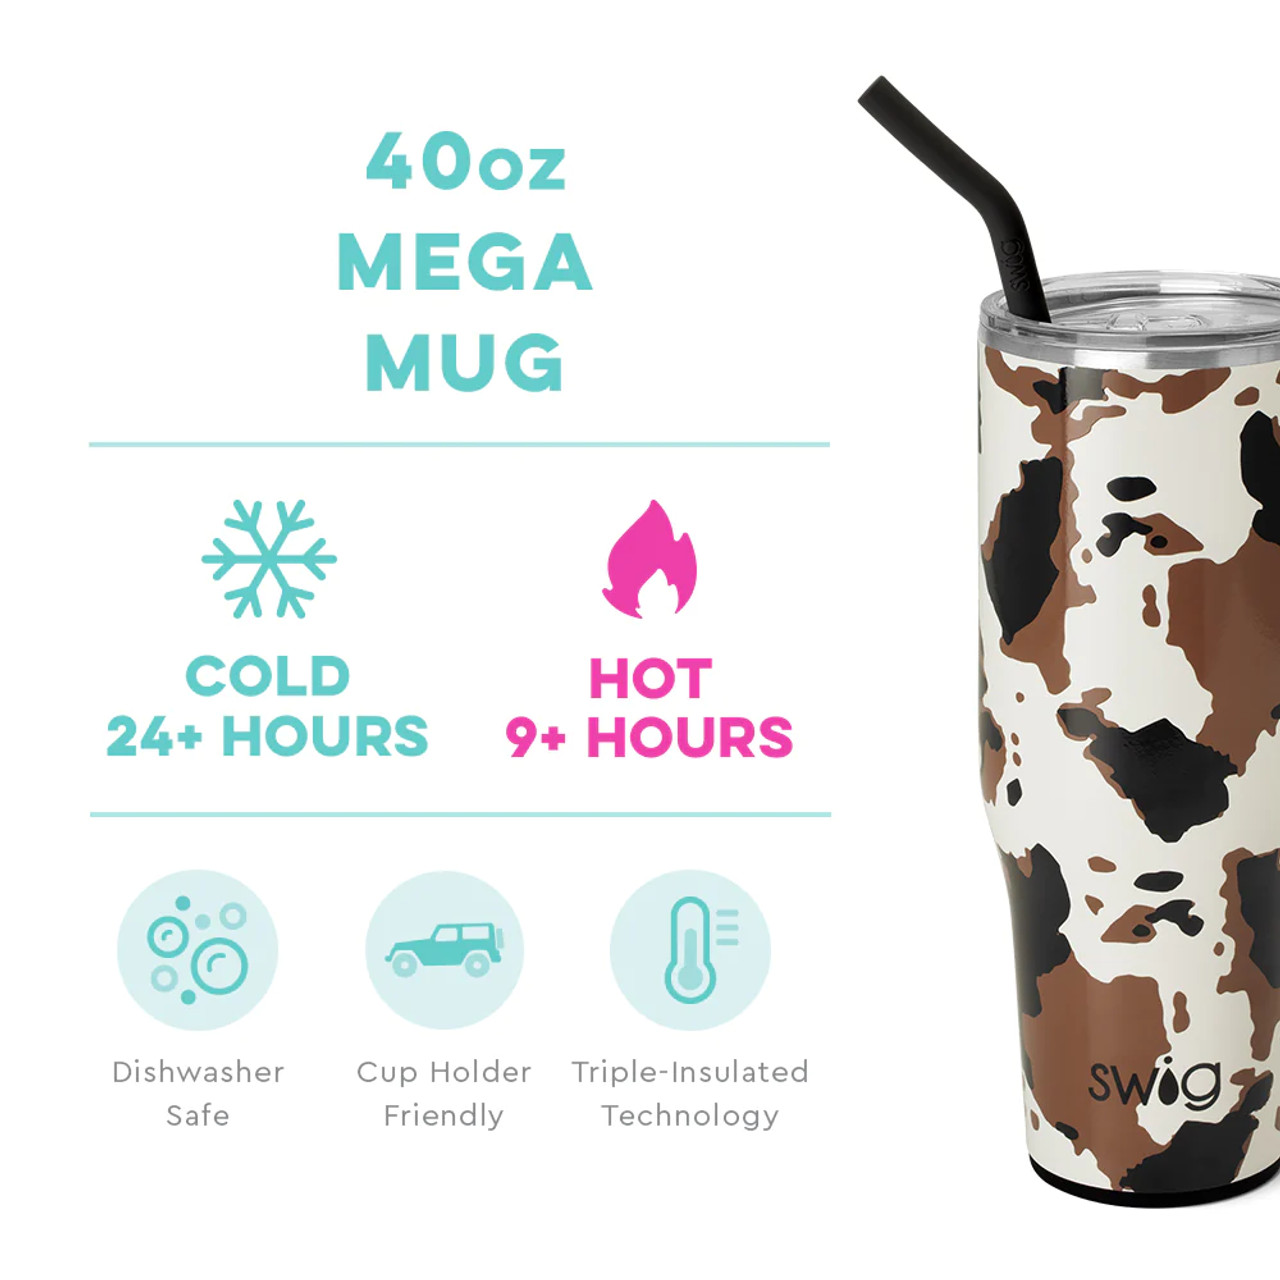 https://cdn11.bigcommerce.com/s-d4i7gnheo/images/stencil/1280x1280/products/16953/26318/swig-life-signature-40oz-insulated-stainless-steel-mega-mug-with-handle-hayride-print-temp-info__89009.1690557941.jpg?c=2